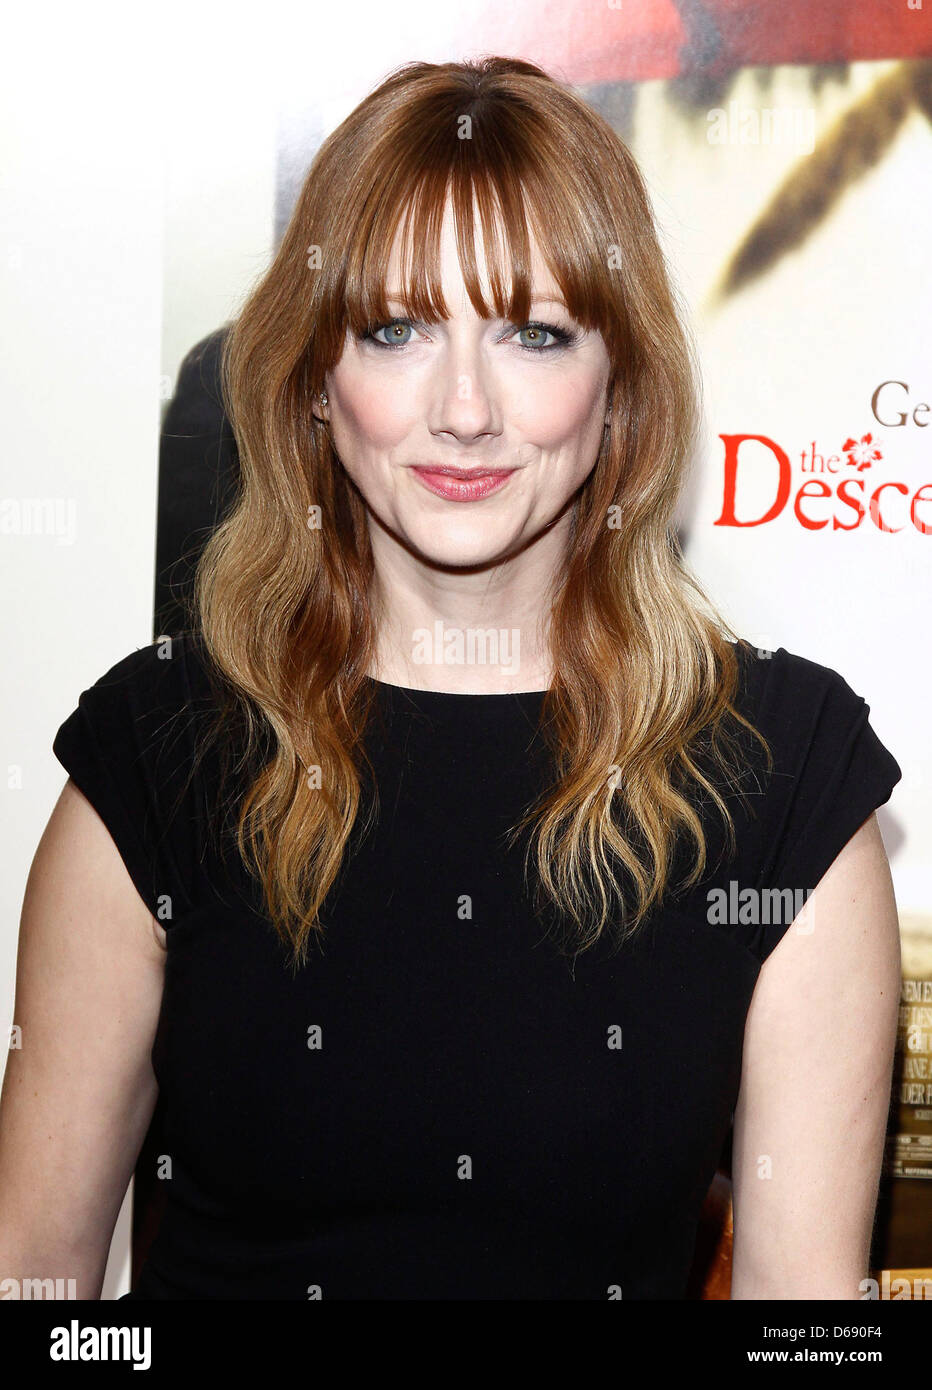 Judy Greer Premiere of 'The Descendants' at Samuel Goldwyn Theatre in Beverly Hills - Arrivals Los Angeles, California - Stock Photo